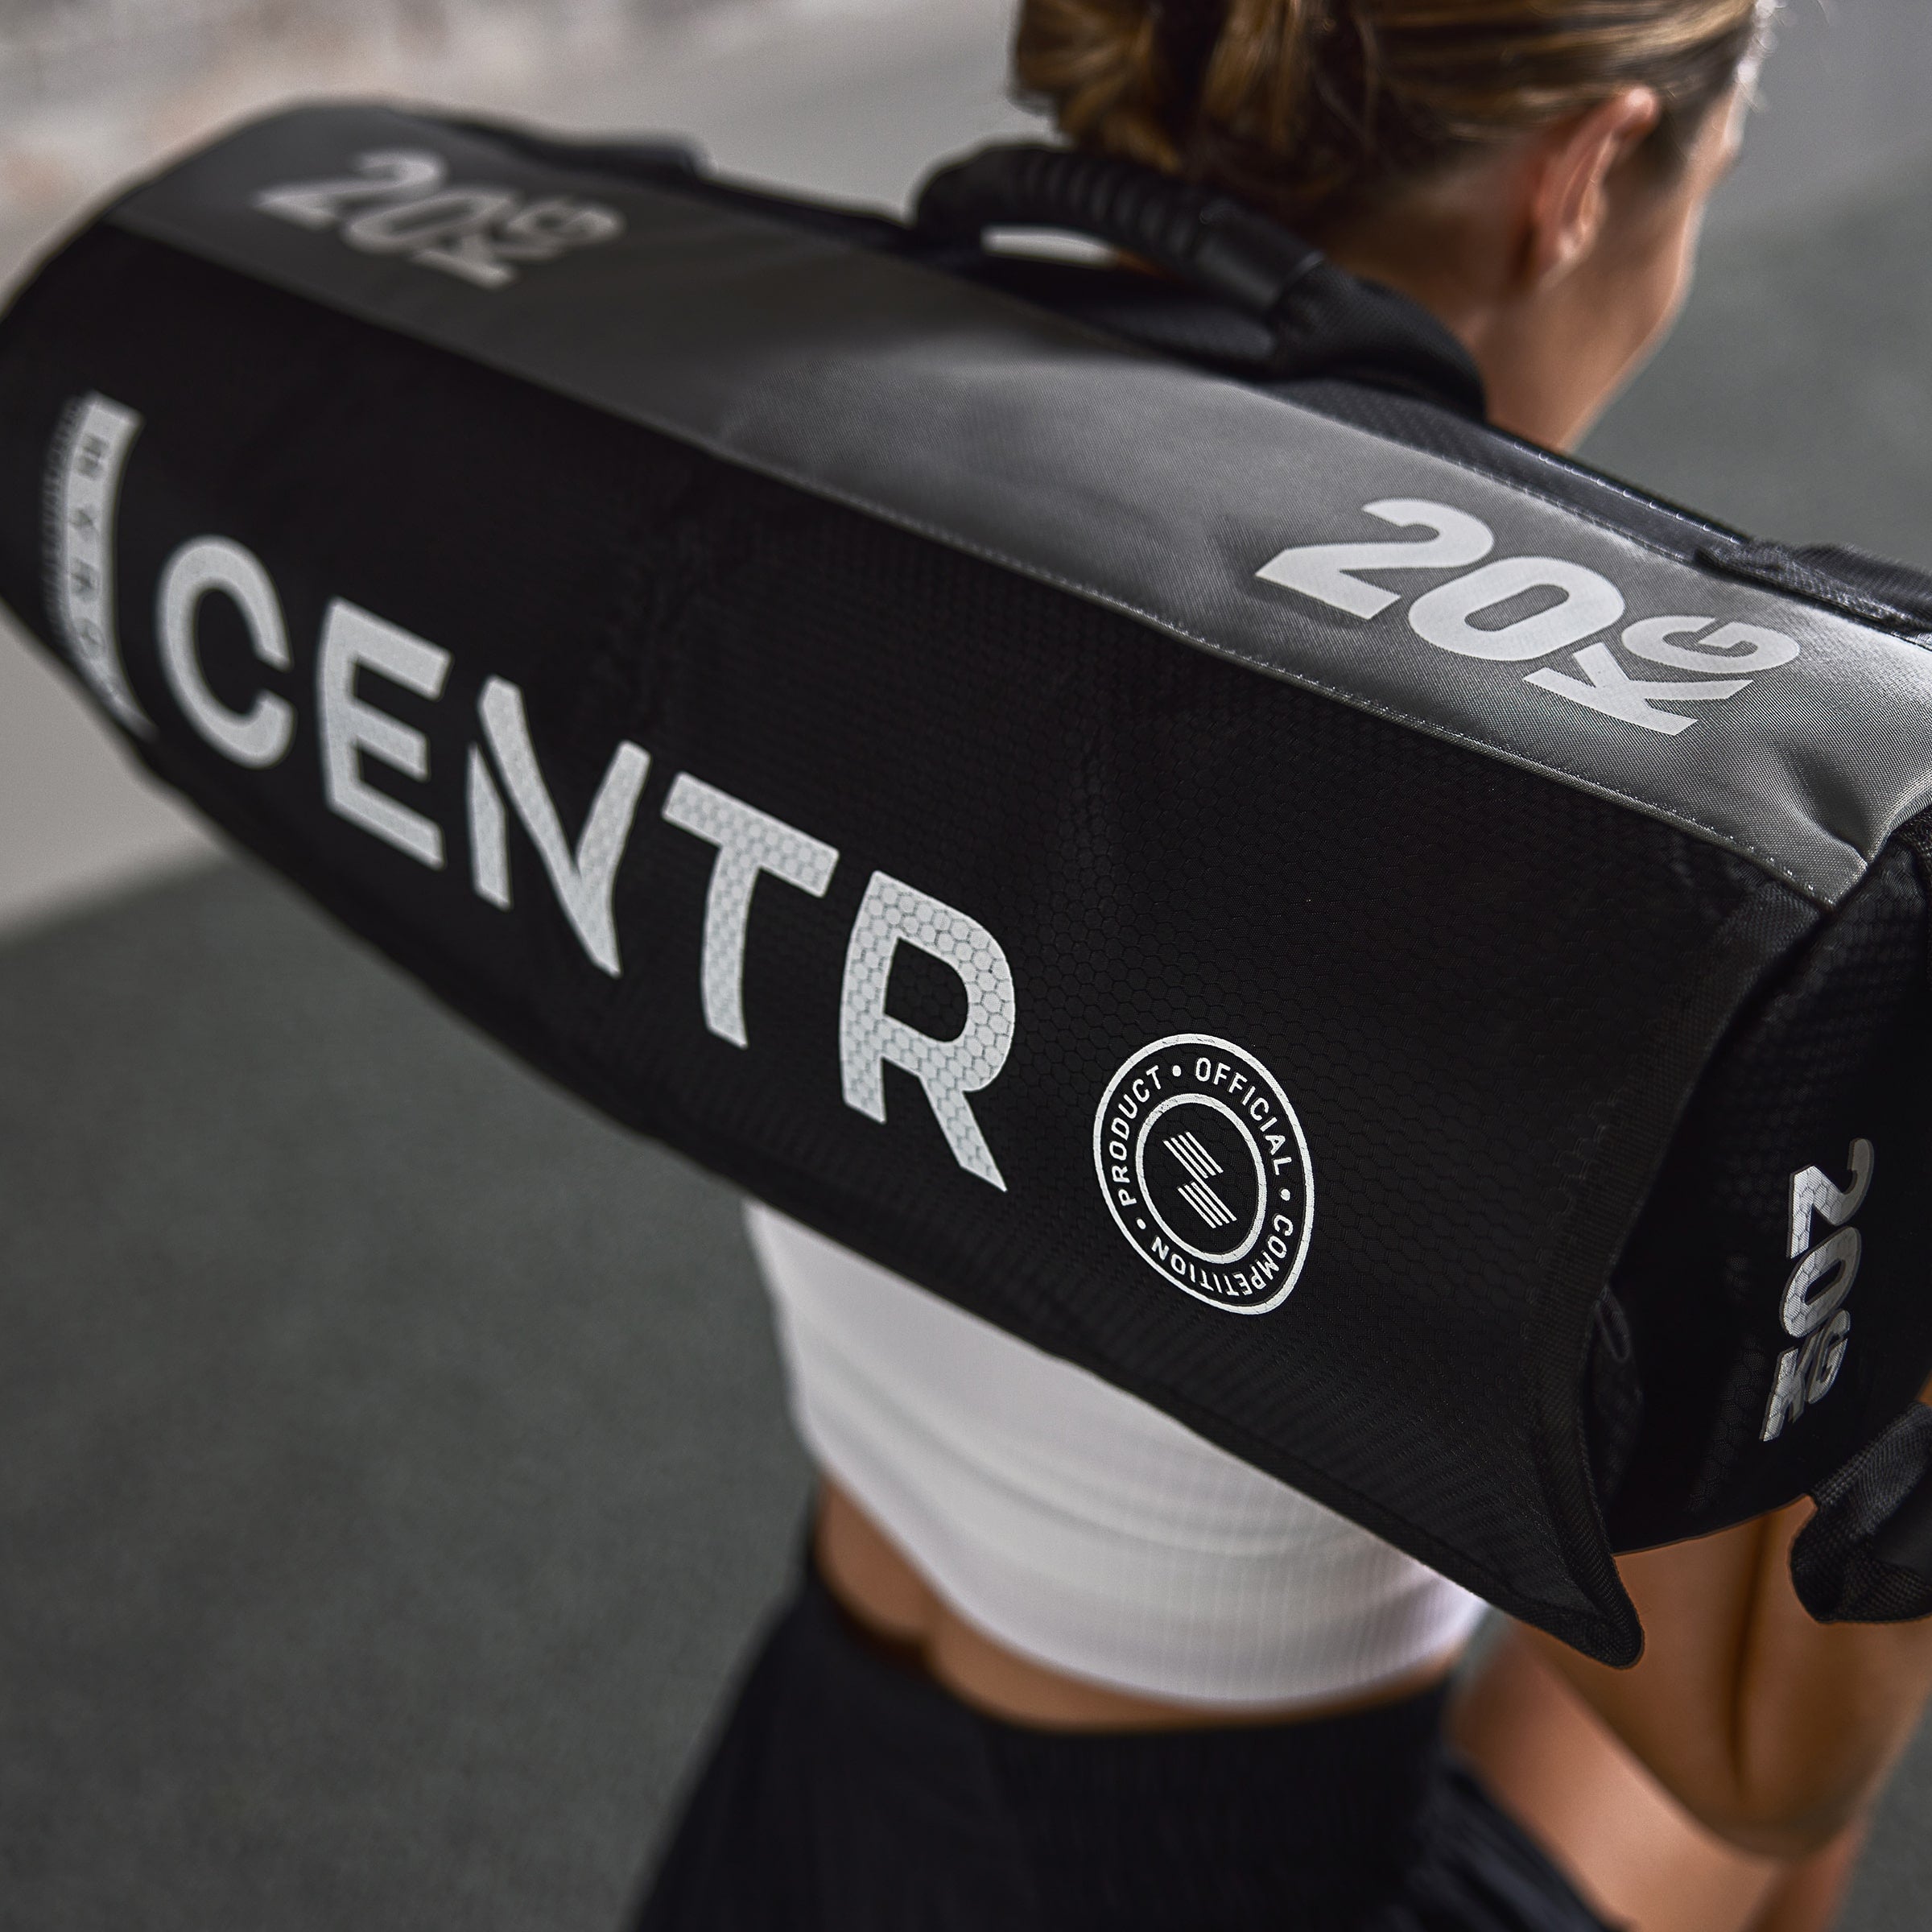 CENTR x HYROX Competition Sandbag (SHIPPING EARLY MAY)